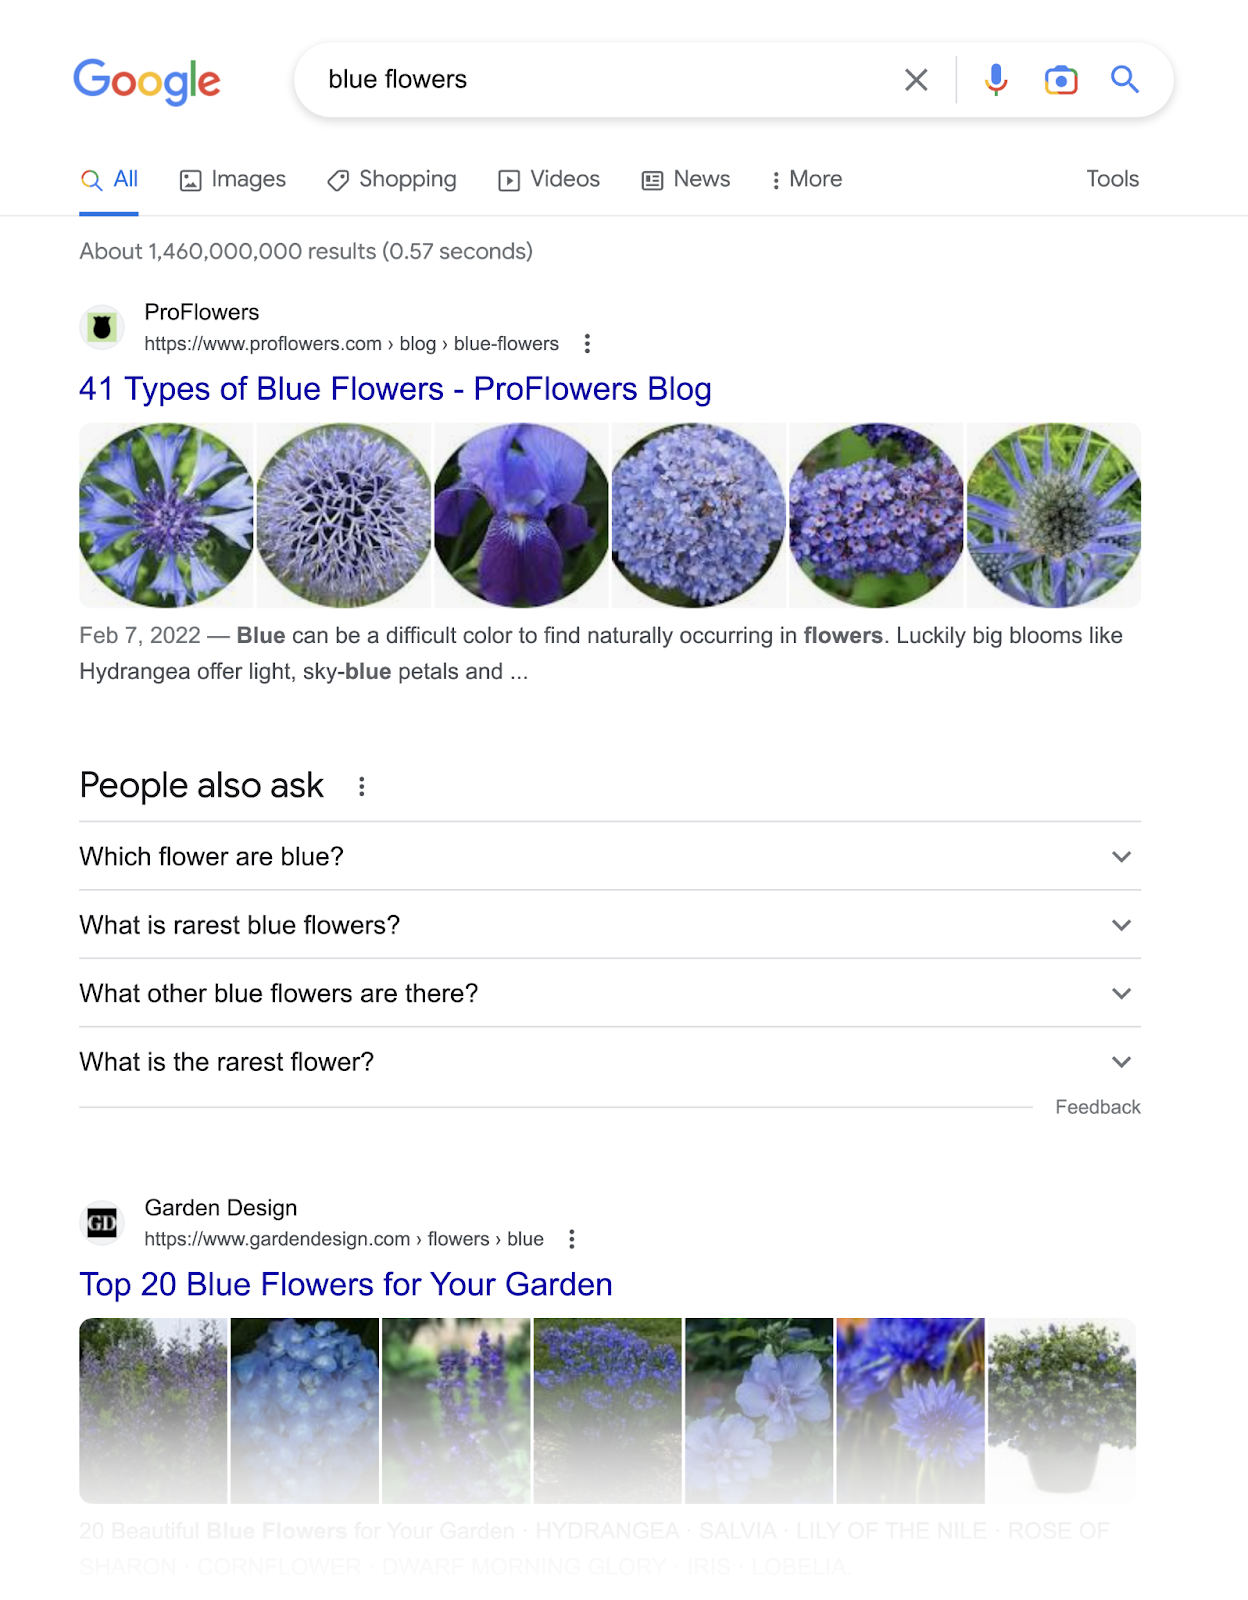 SERP for blue flowers